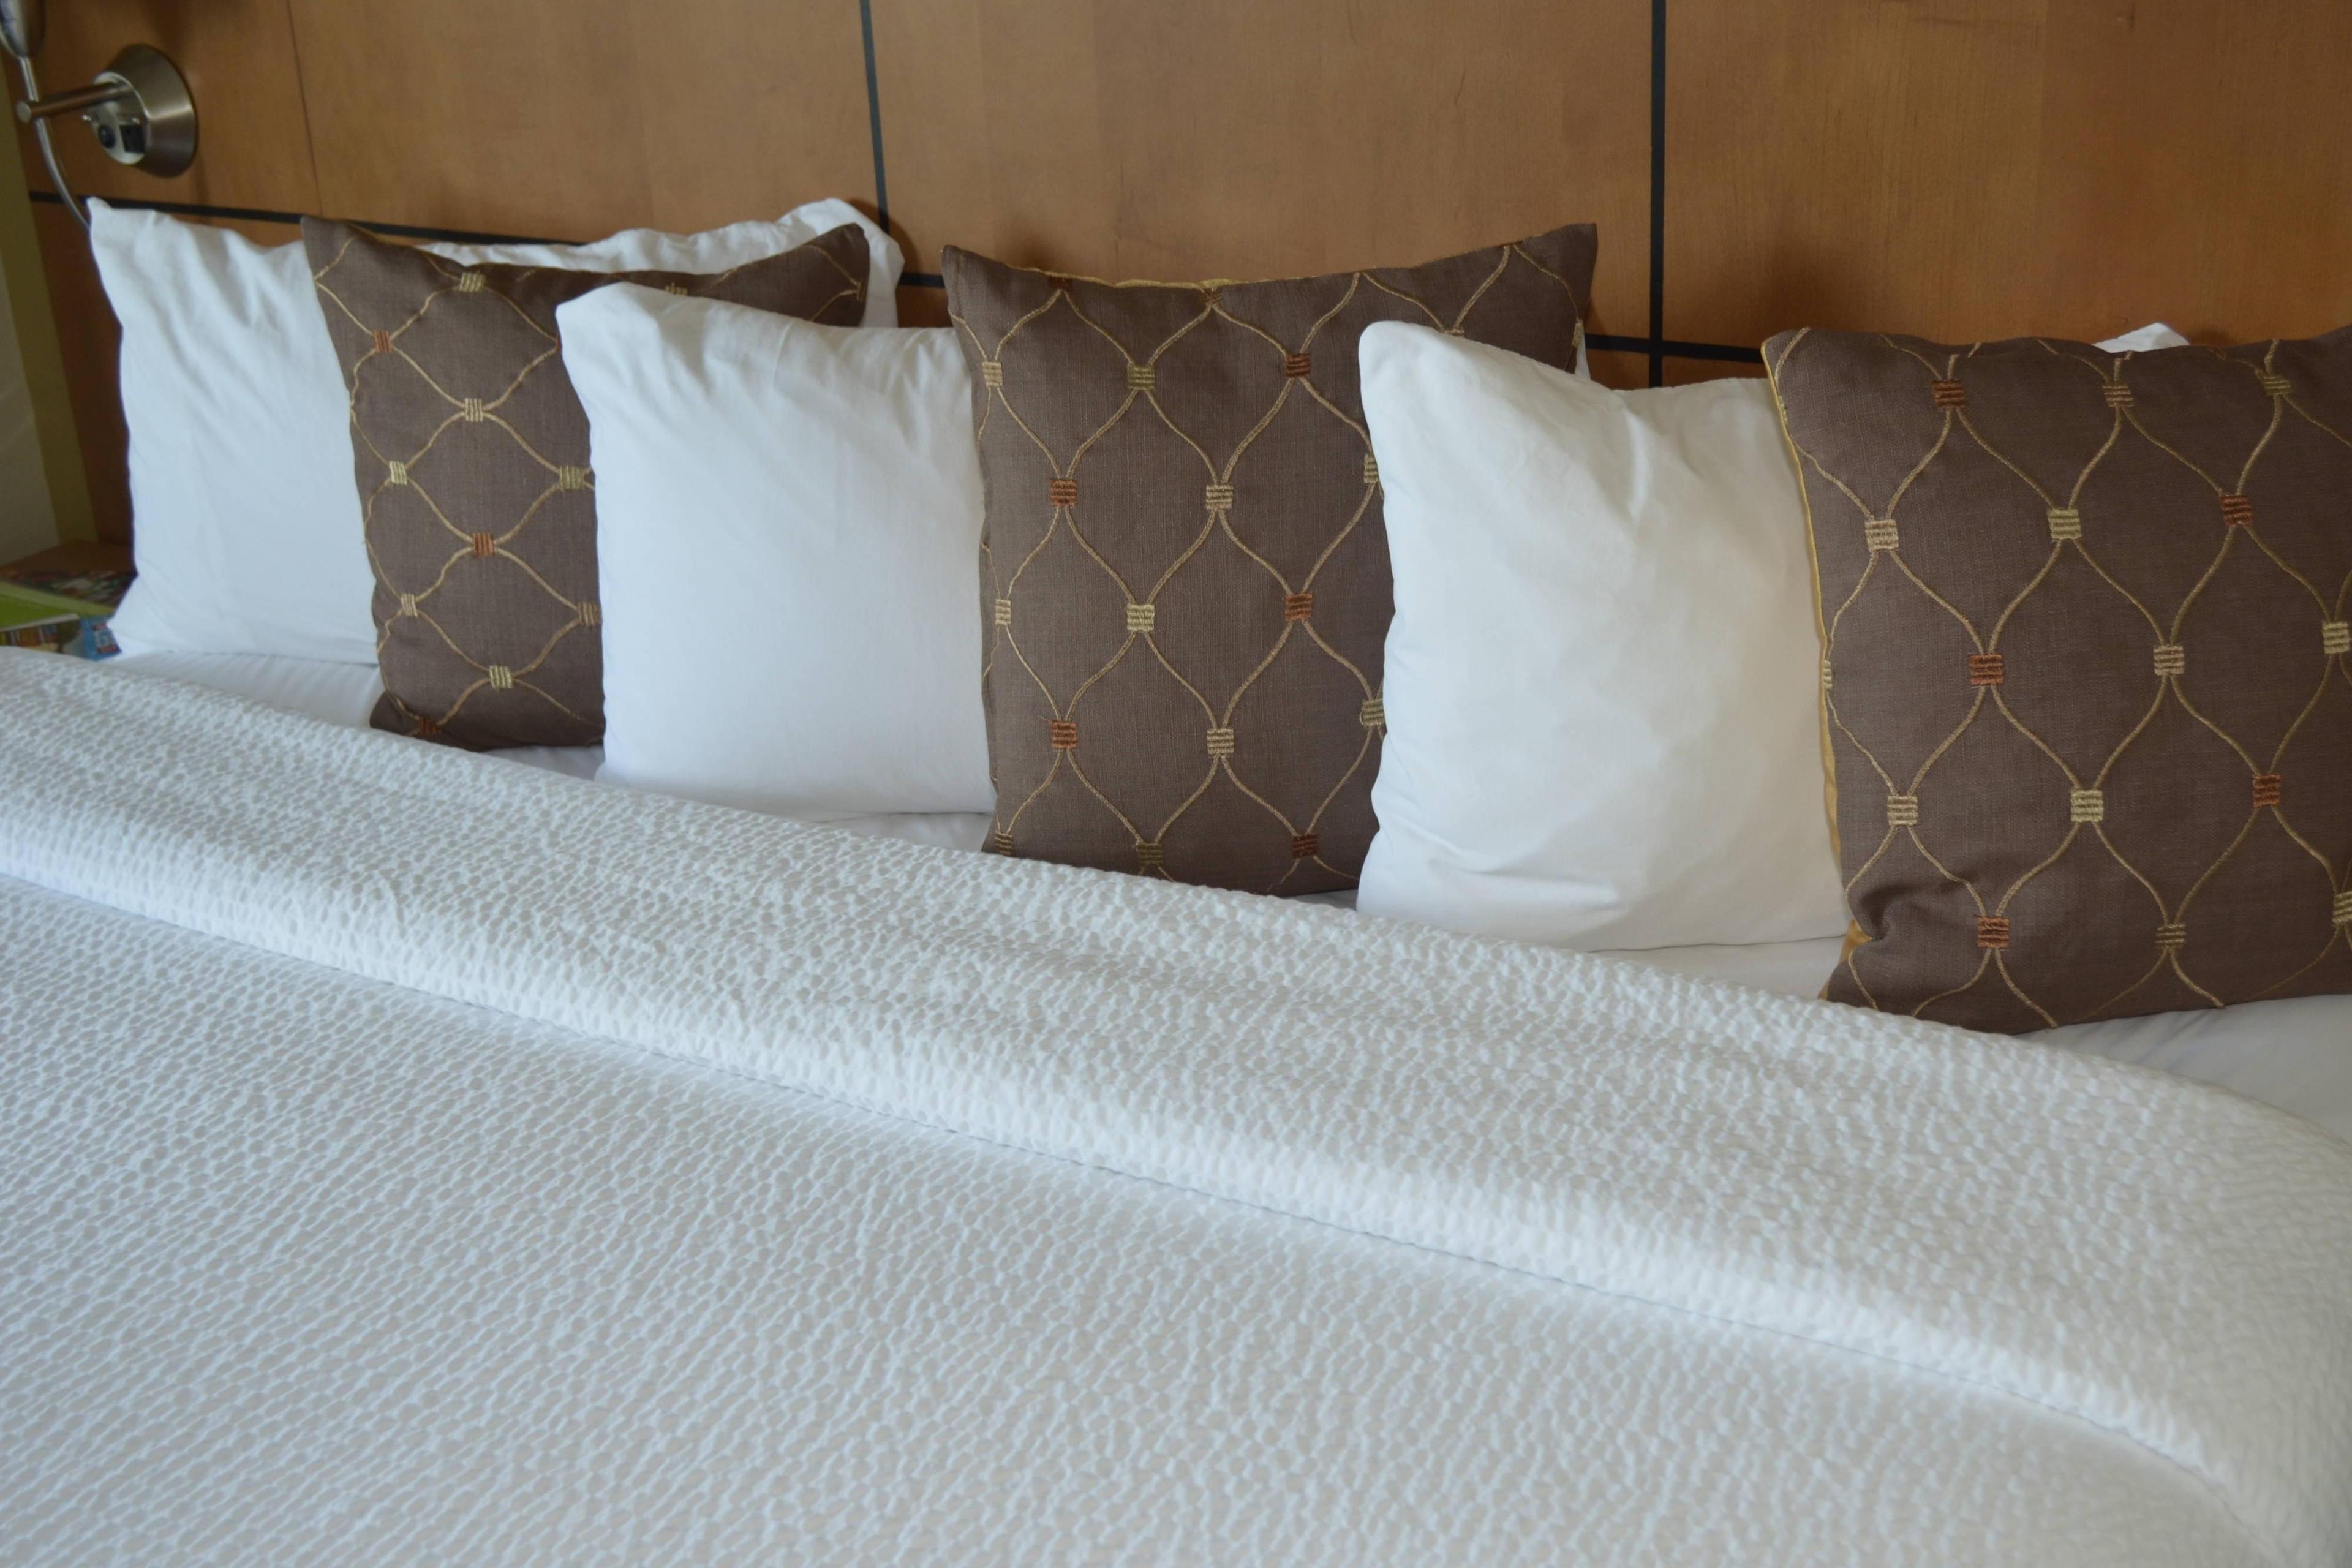 Enjoy our comfortable and fluffy pillows.